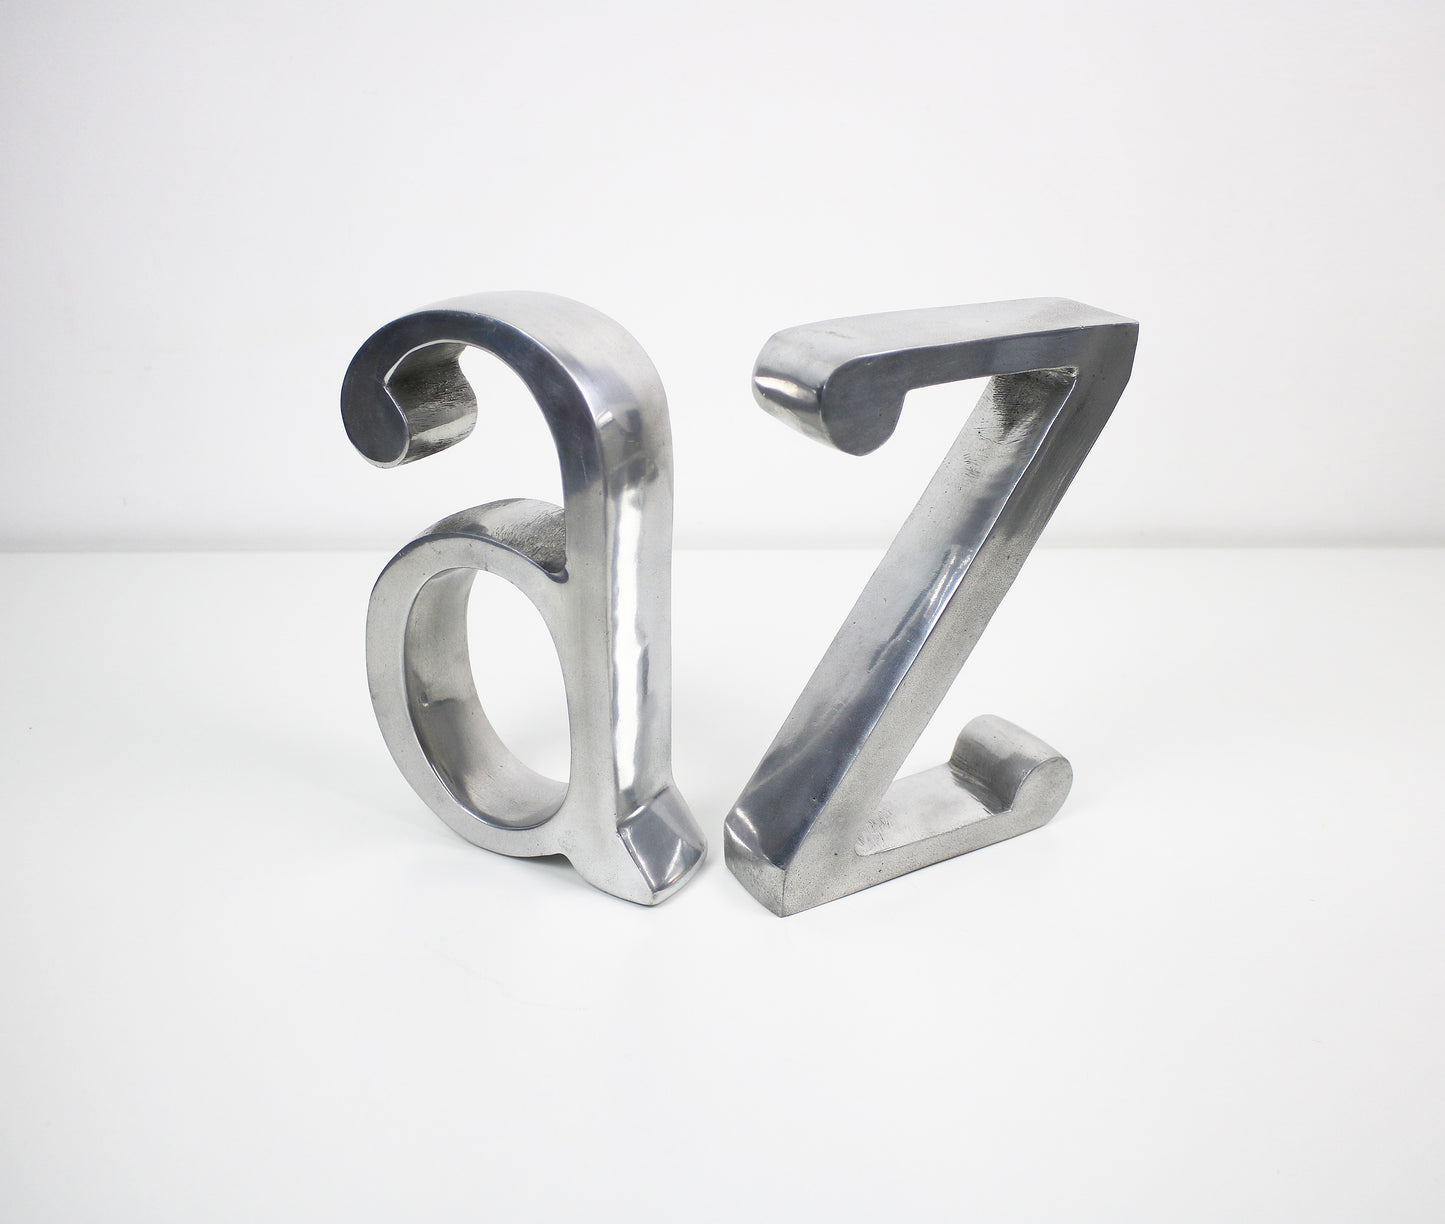 Vintage large A to Z bookends - polished